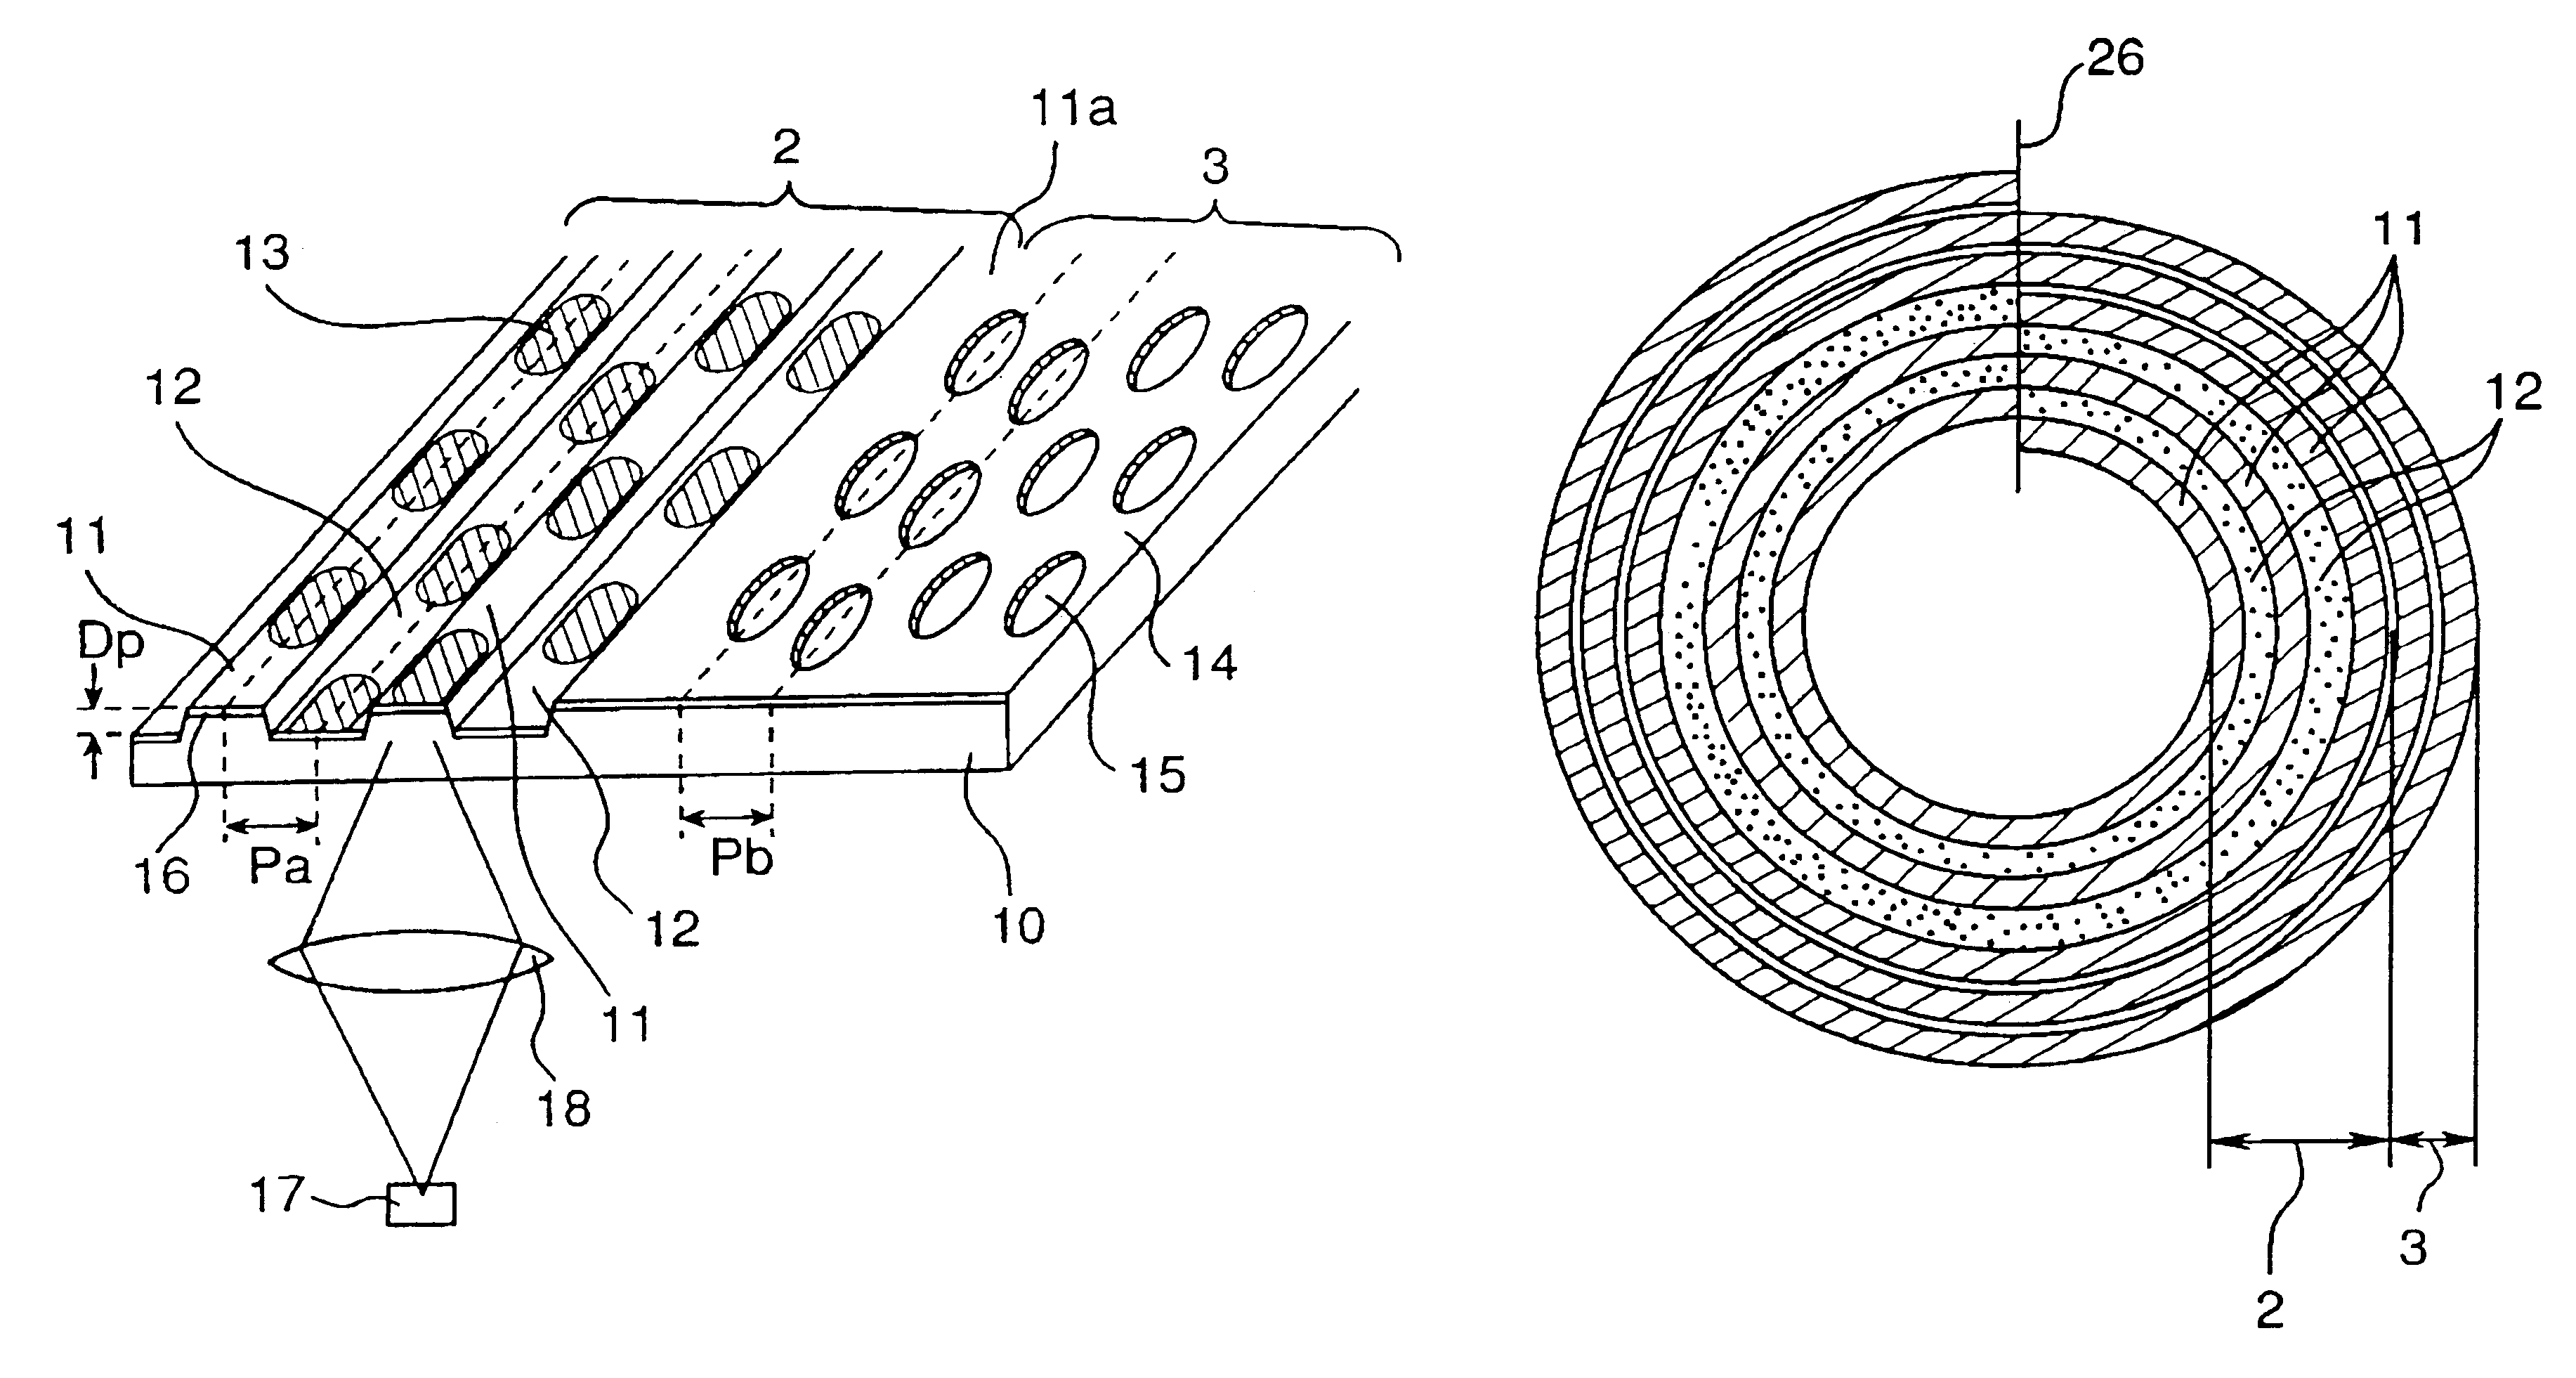 Optical disc with a rewritable area and a read-only area